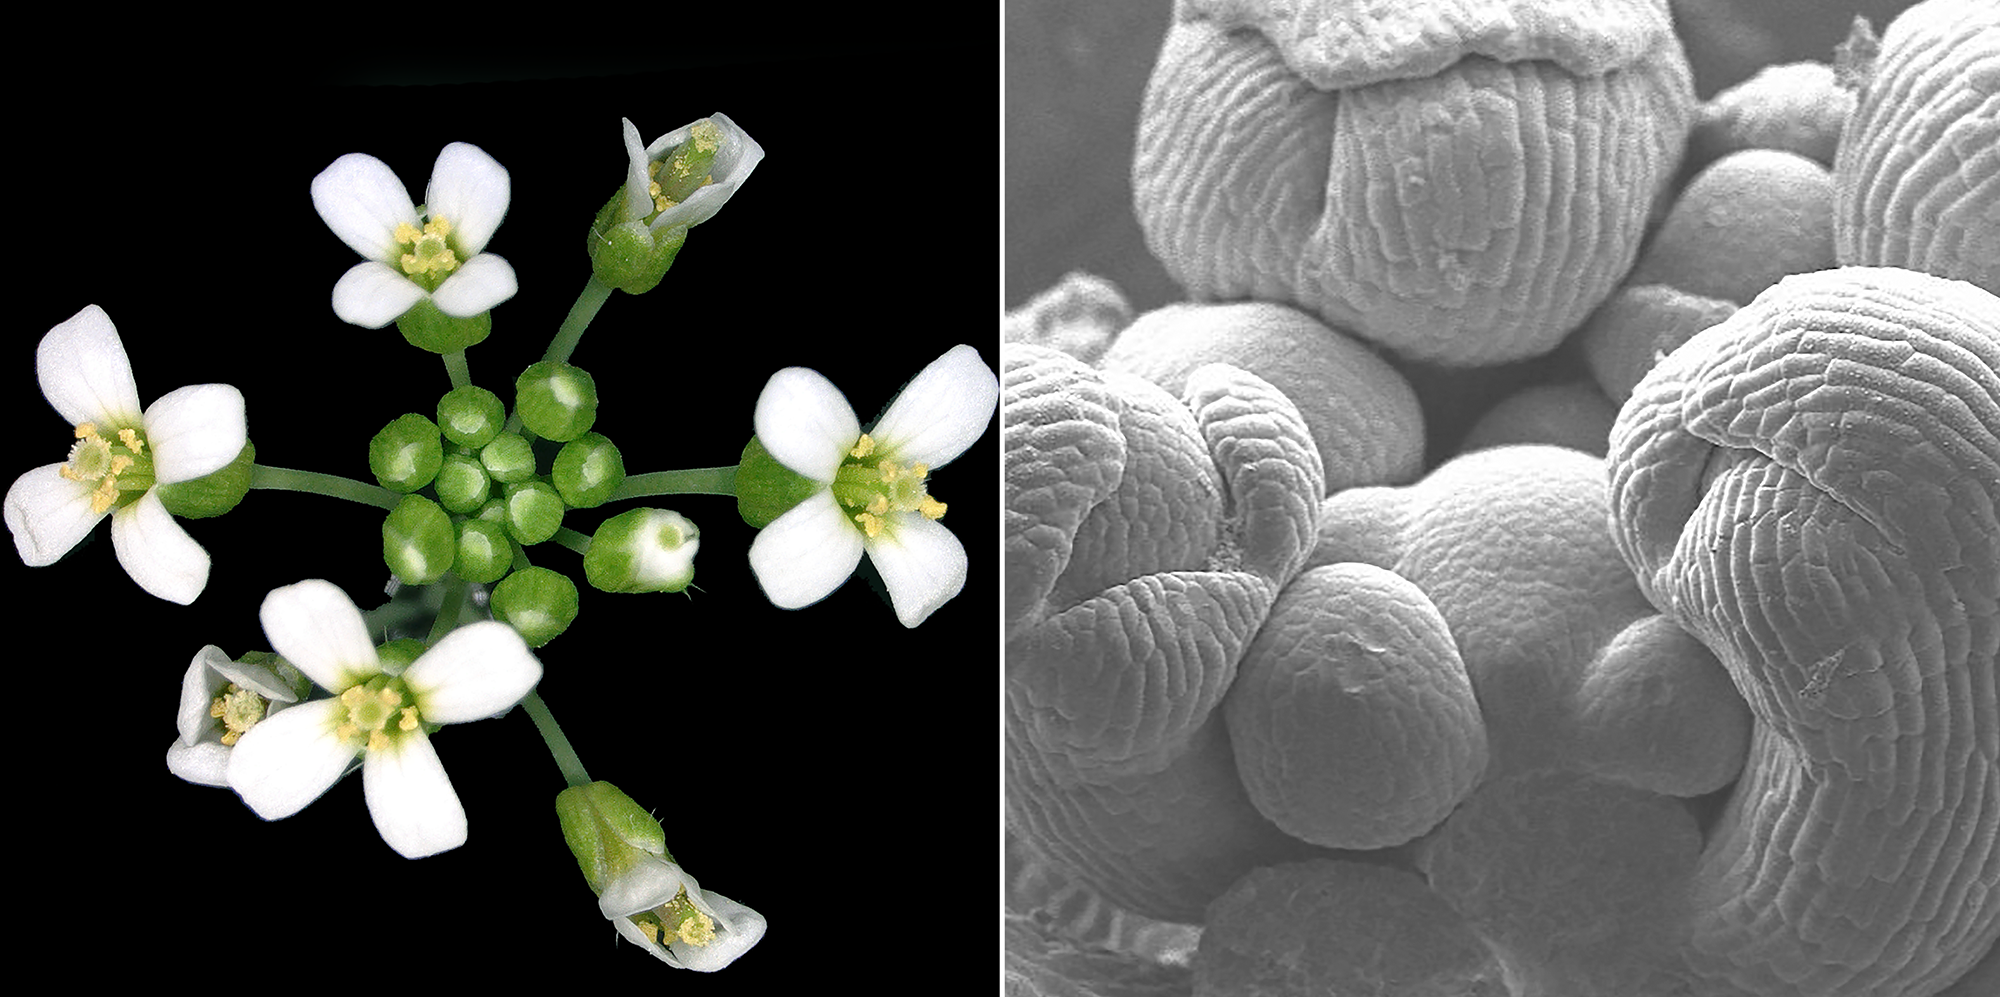 Arabidopsis thaliana shoot apical meristem with multiple flowers radiating out from centre at different stages of development (left) and the shoot apex under a scanning electron microscope where the centre area contains stem cells and is surrounded by you